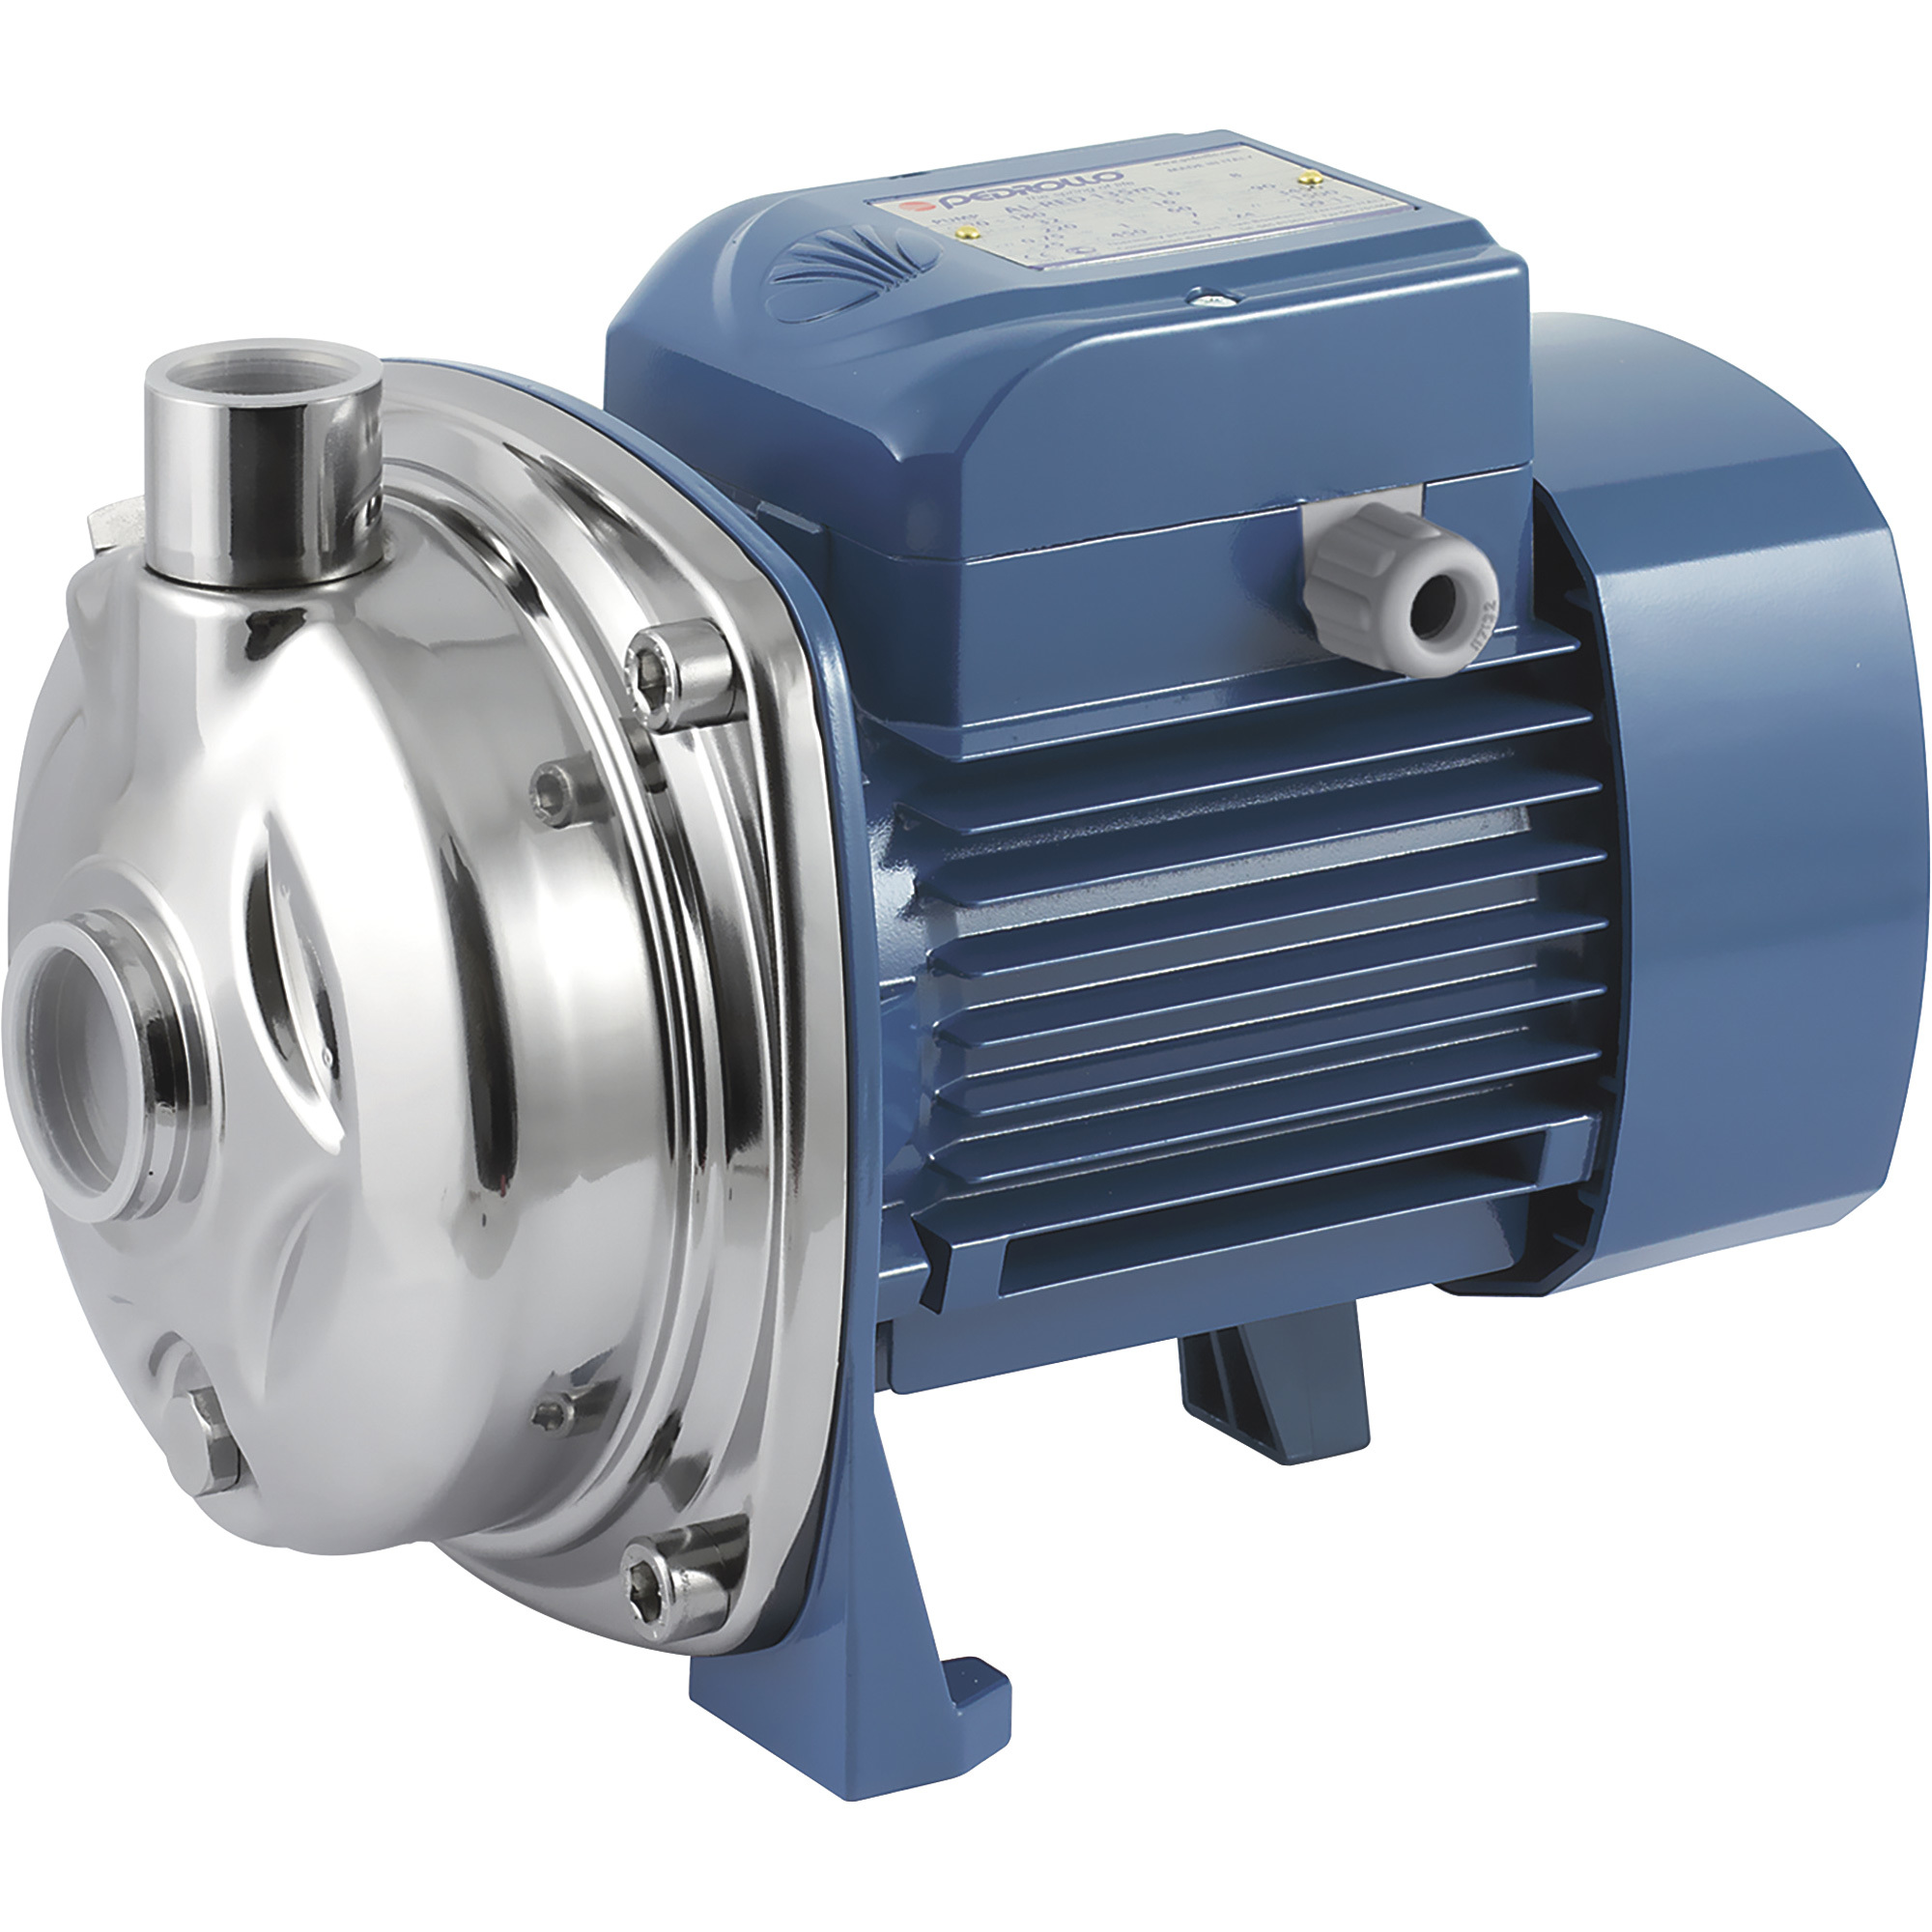 Pedrollo Centrifugal Stainless Steel Water Pump â 2,853 GPH, 1 HP, 230 Volts, Model AL- RED 135m